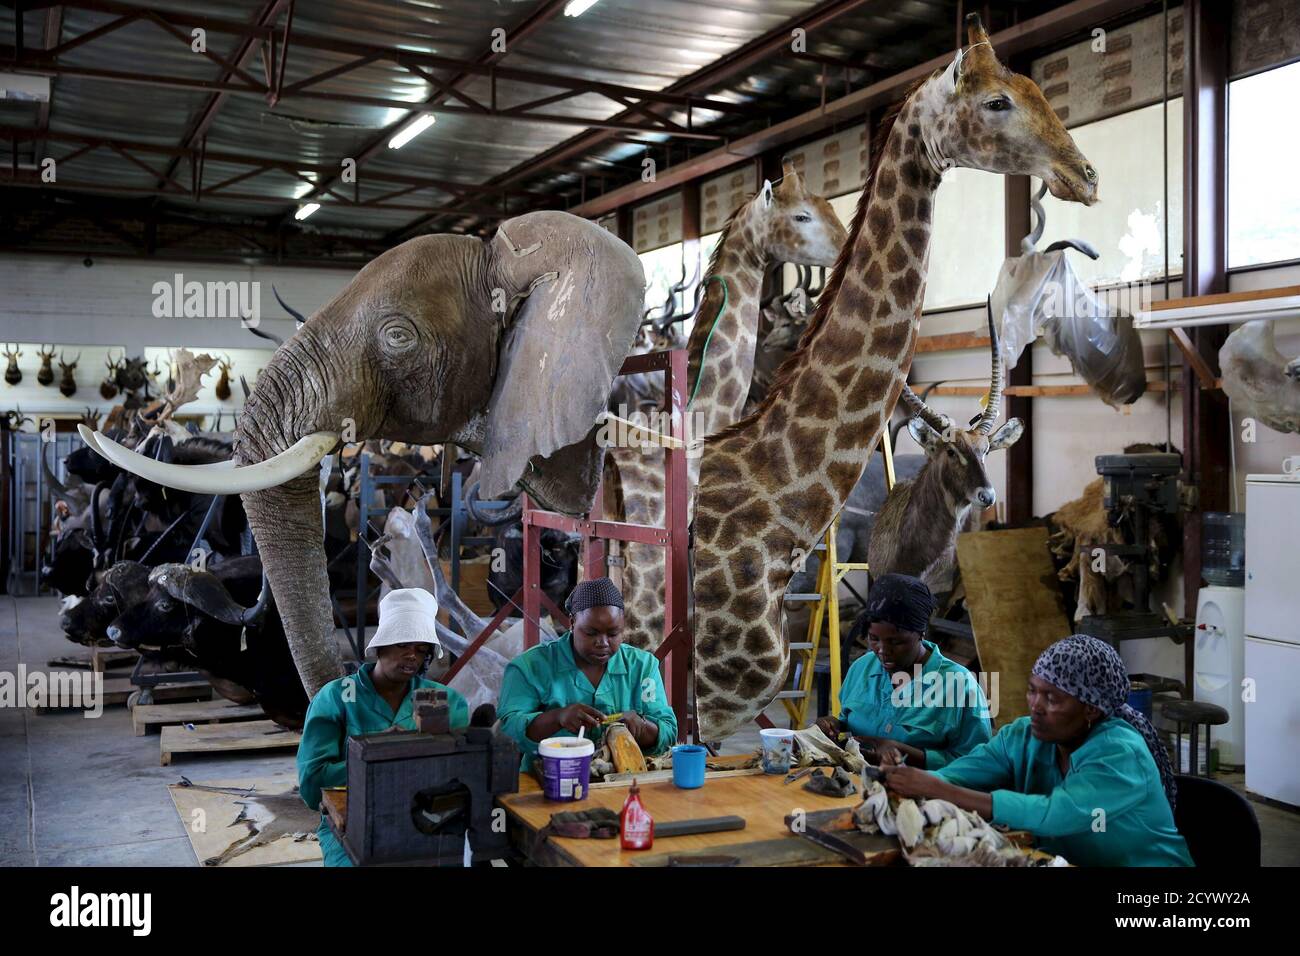 Workers prepare animal skins in front of animal trophies at the taxidermy  studio in Pretoria,February 12, 2015. Africa's big game hunting industry  helps protect endangered species, according to its advocates. Opponents say